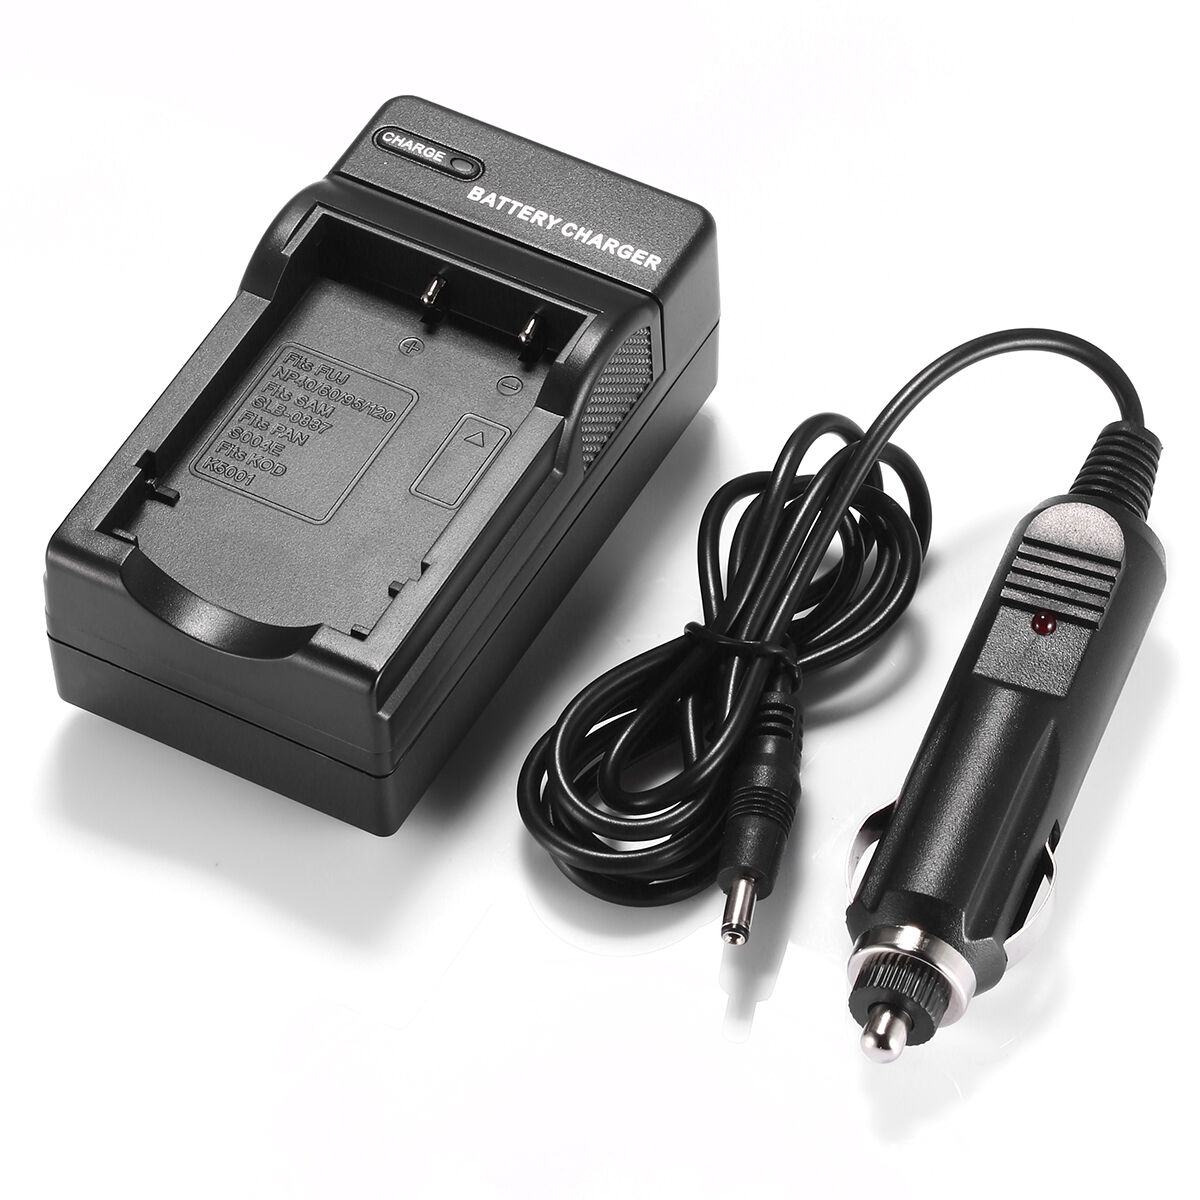 CASIO Exilim Zoom EX-Z2000BK battery charger